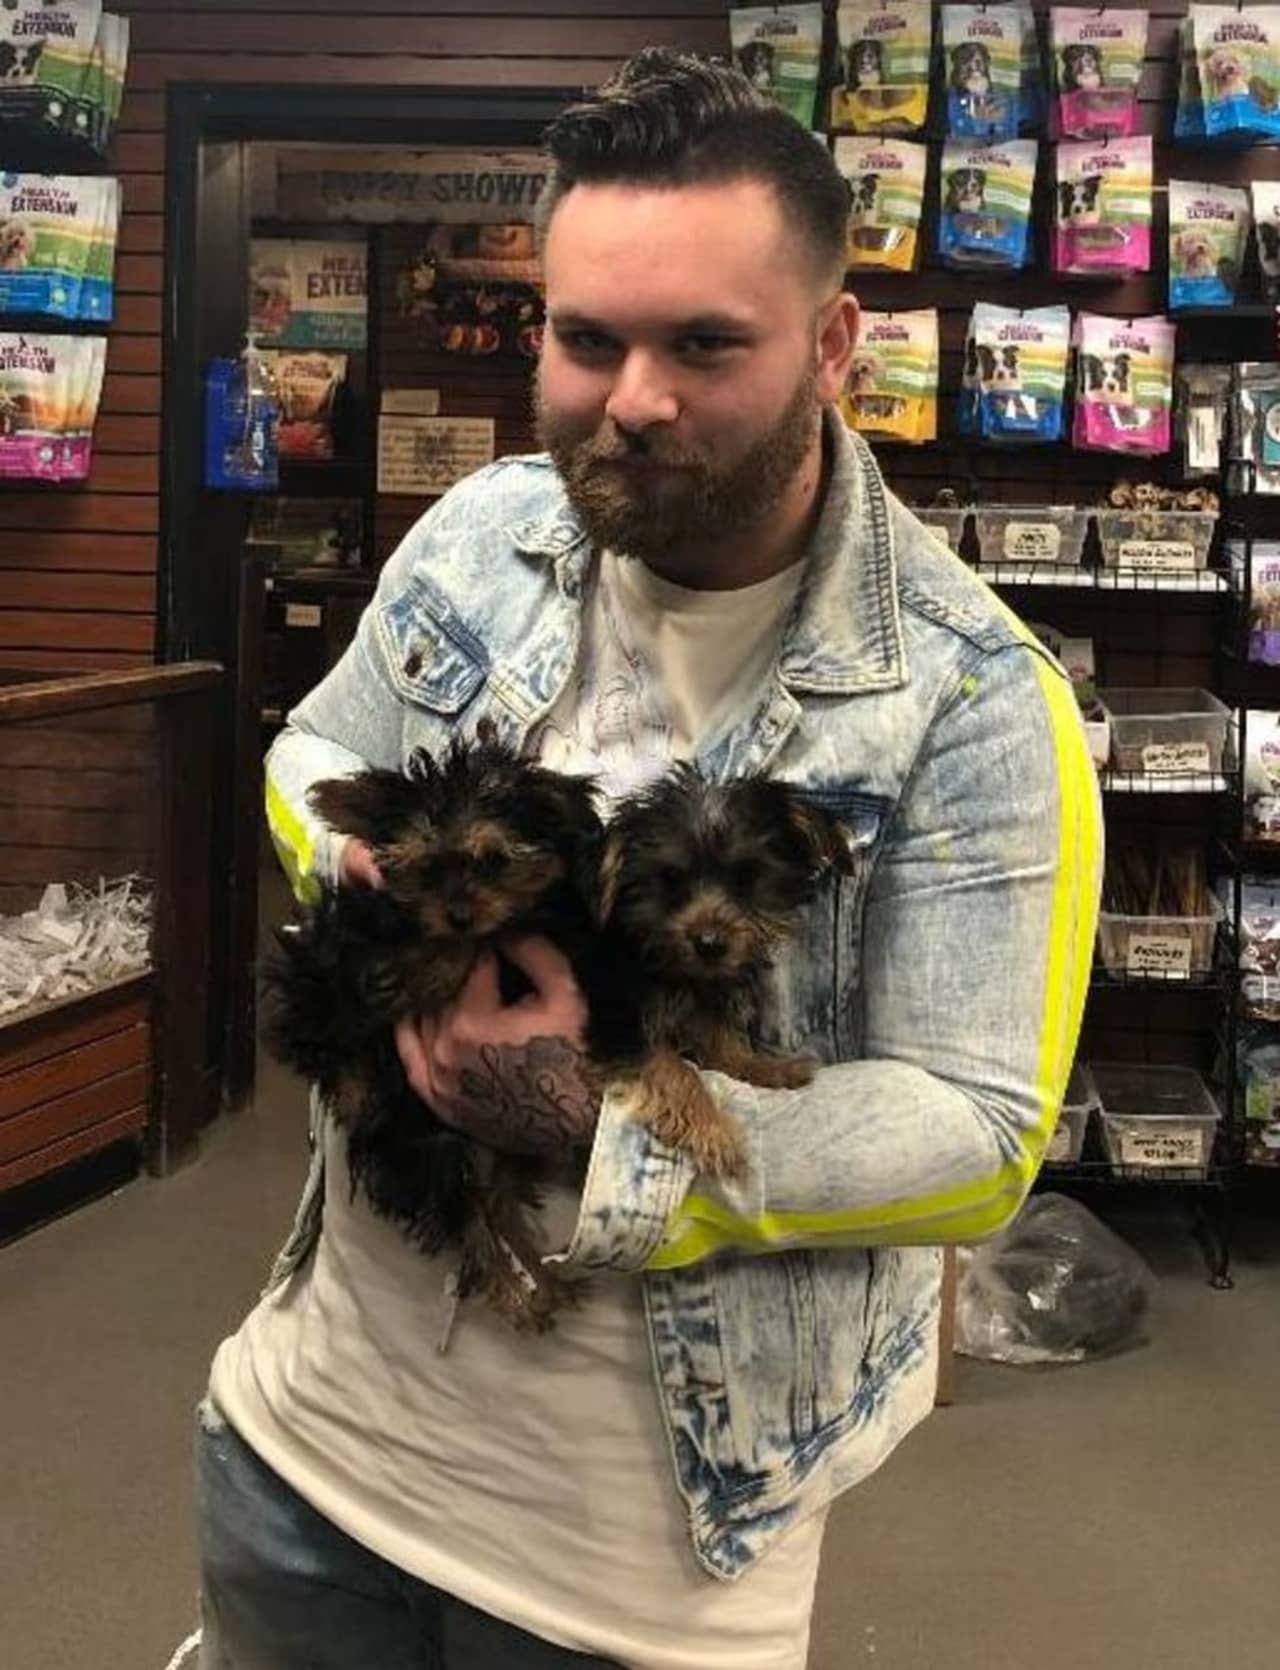 A man is wanted for allegedly using stolen information to purchase puppies in Huntington Station.